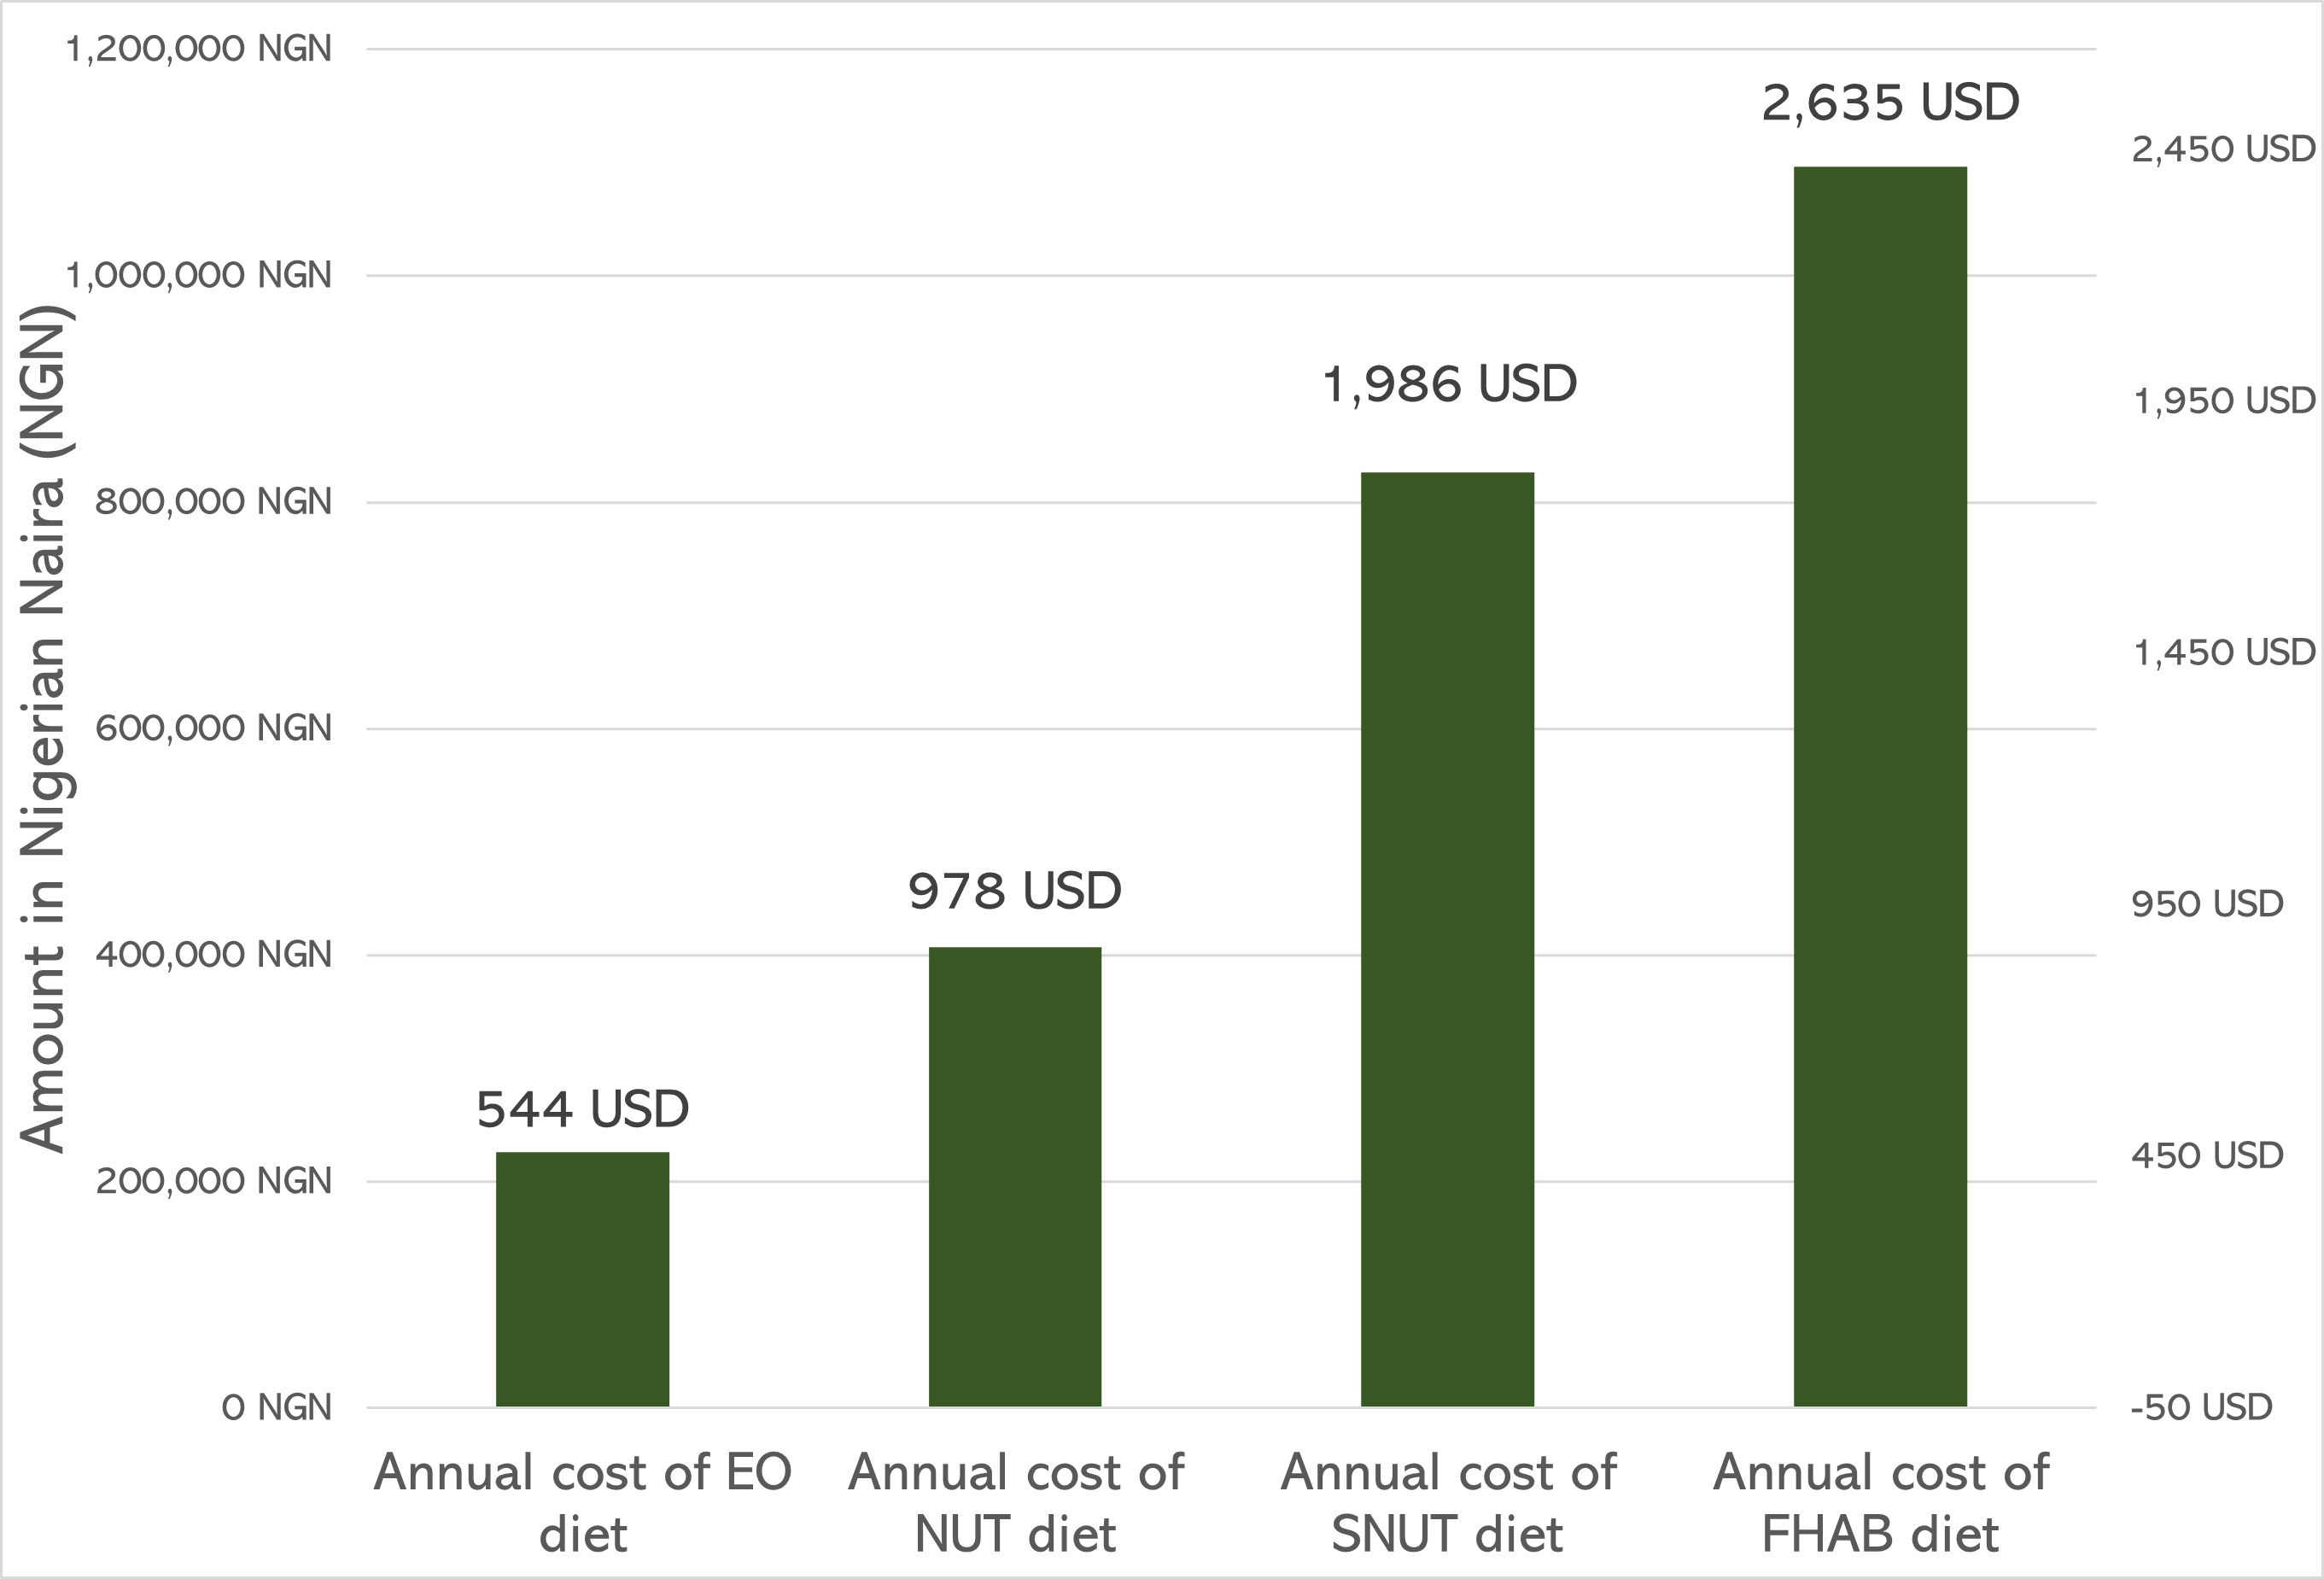 The annual cost of various diet types for a standard household with five members